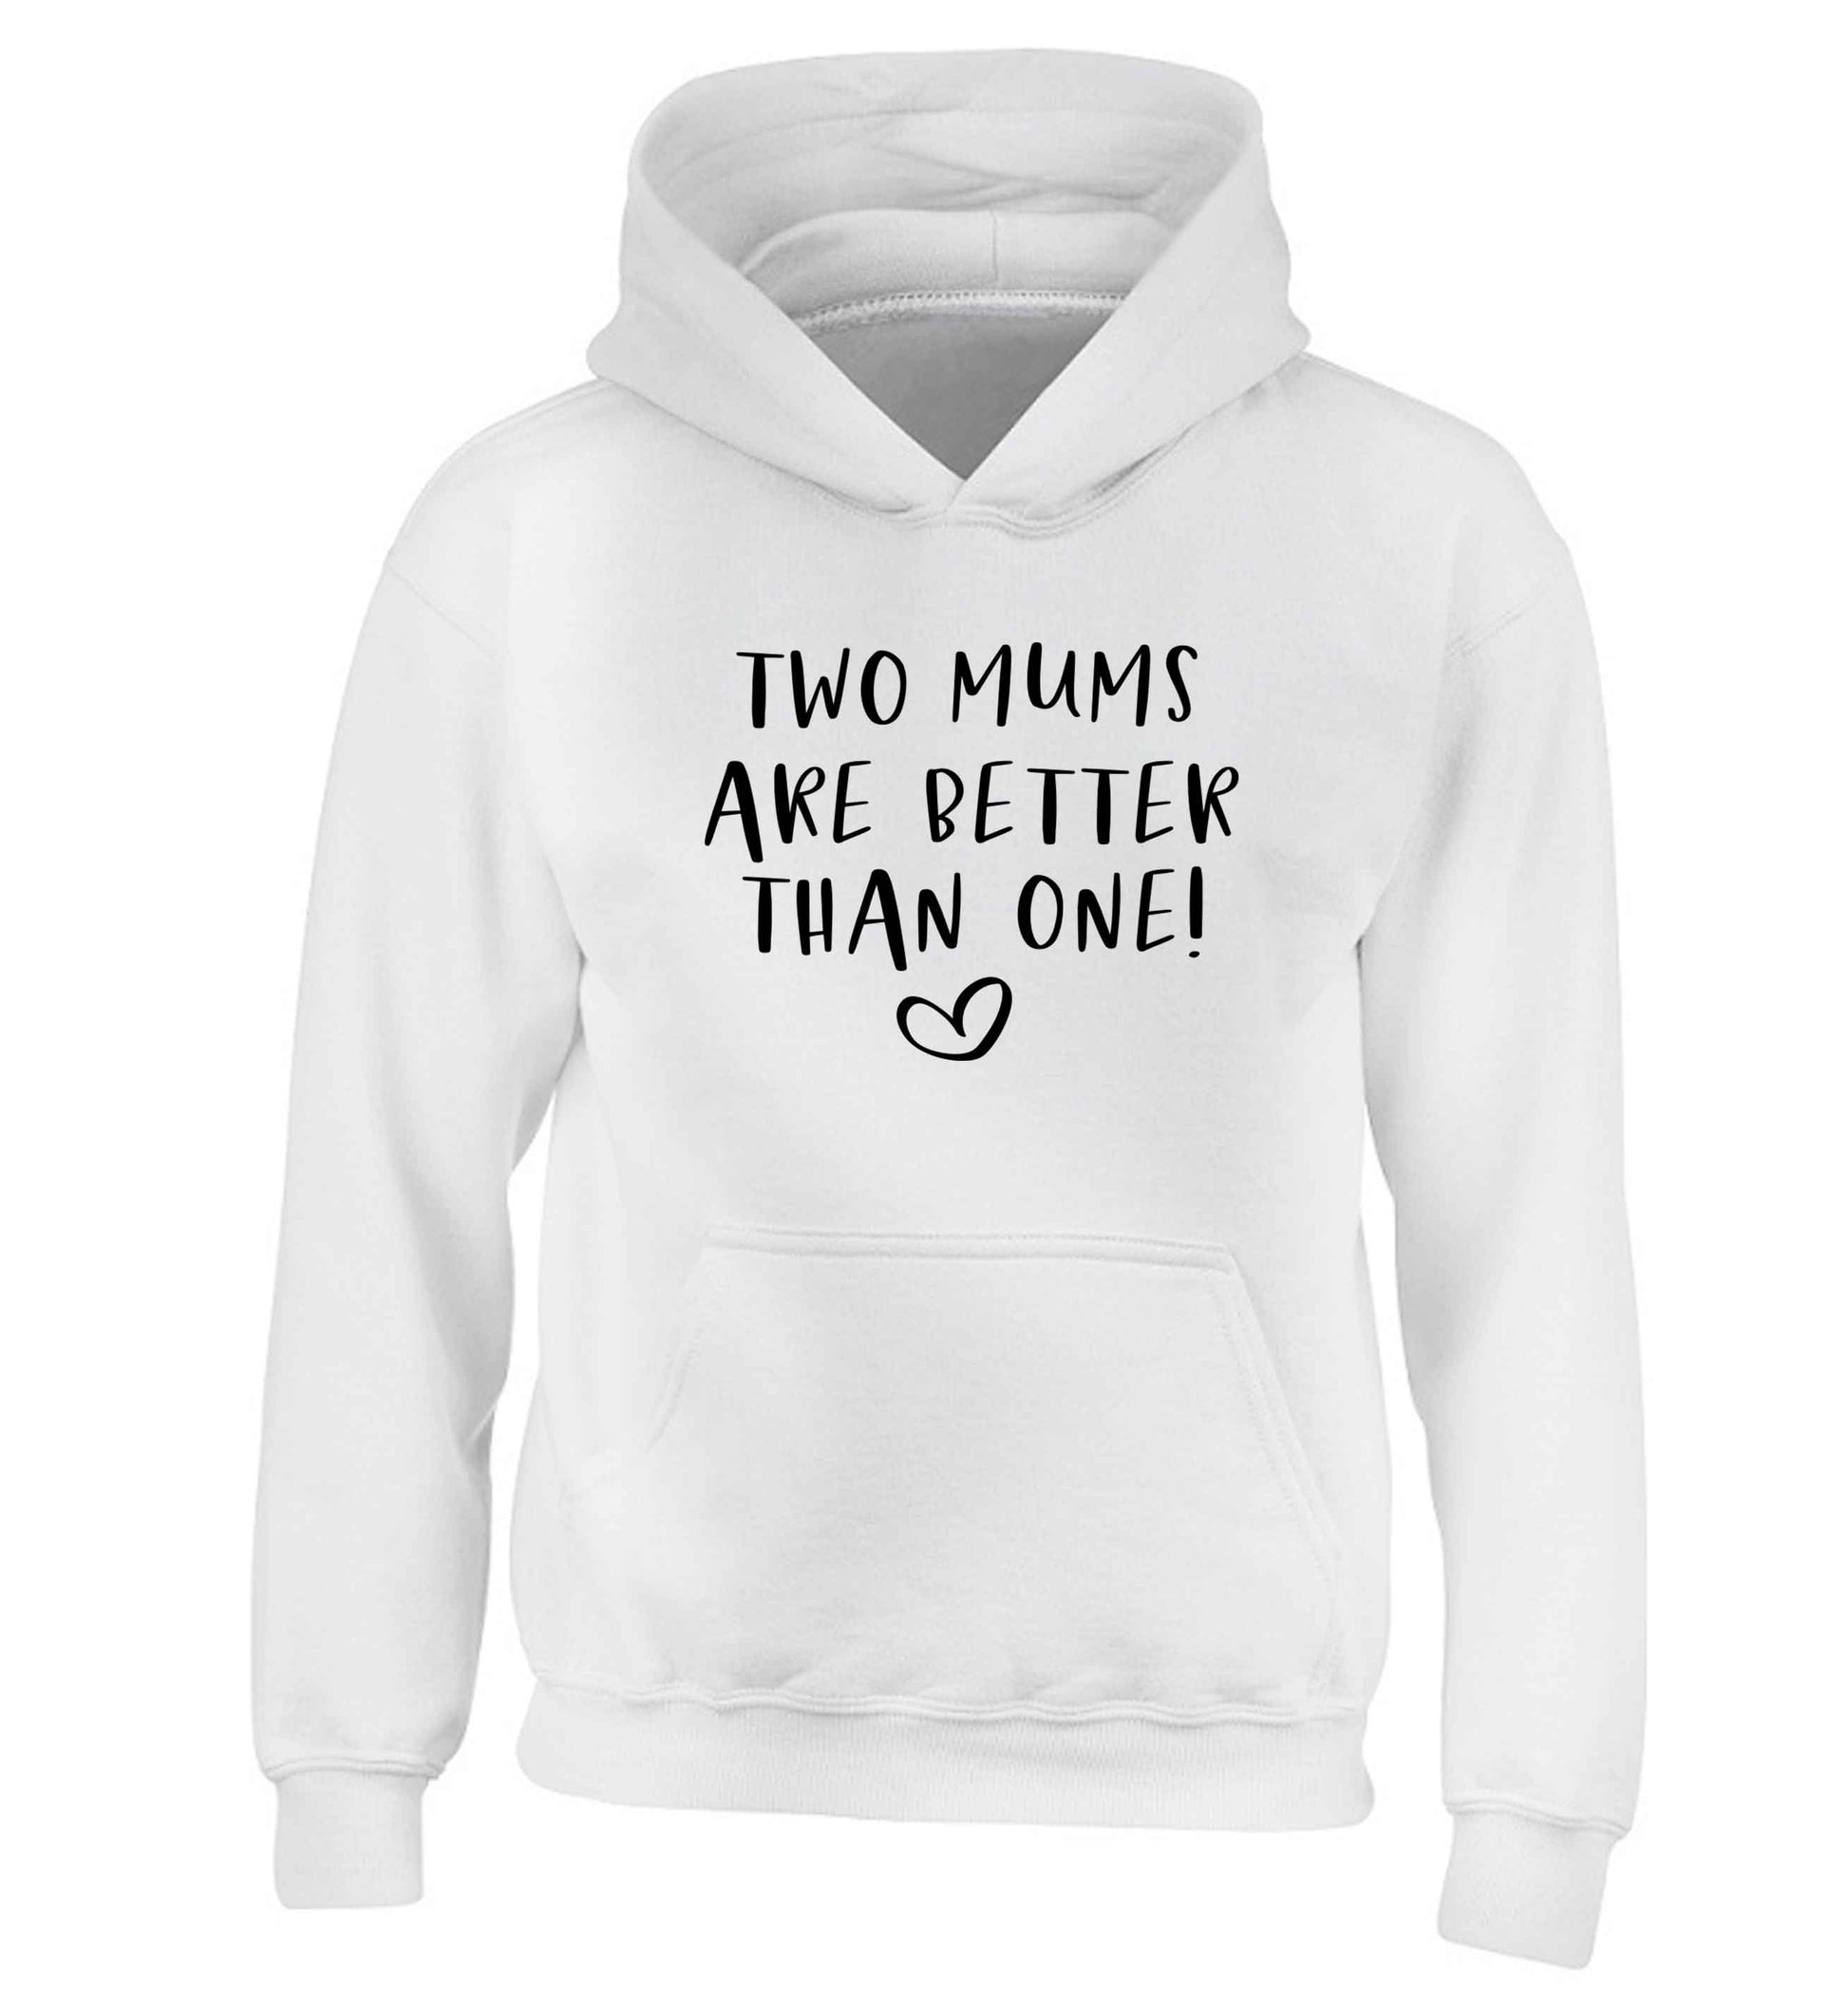 Two mums are better than one children's white hoodie 12-13 Years